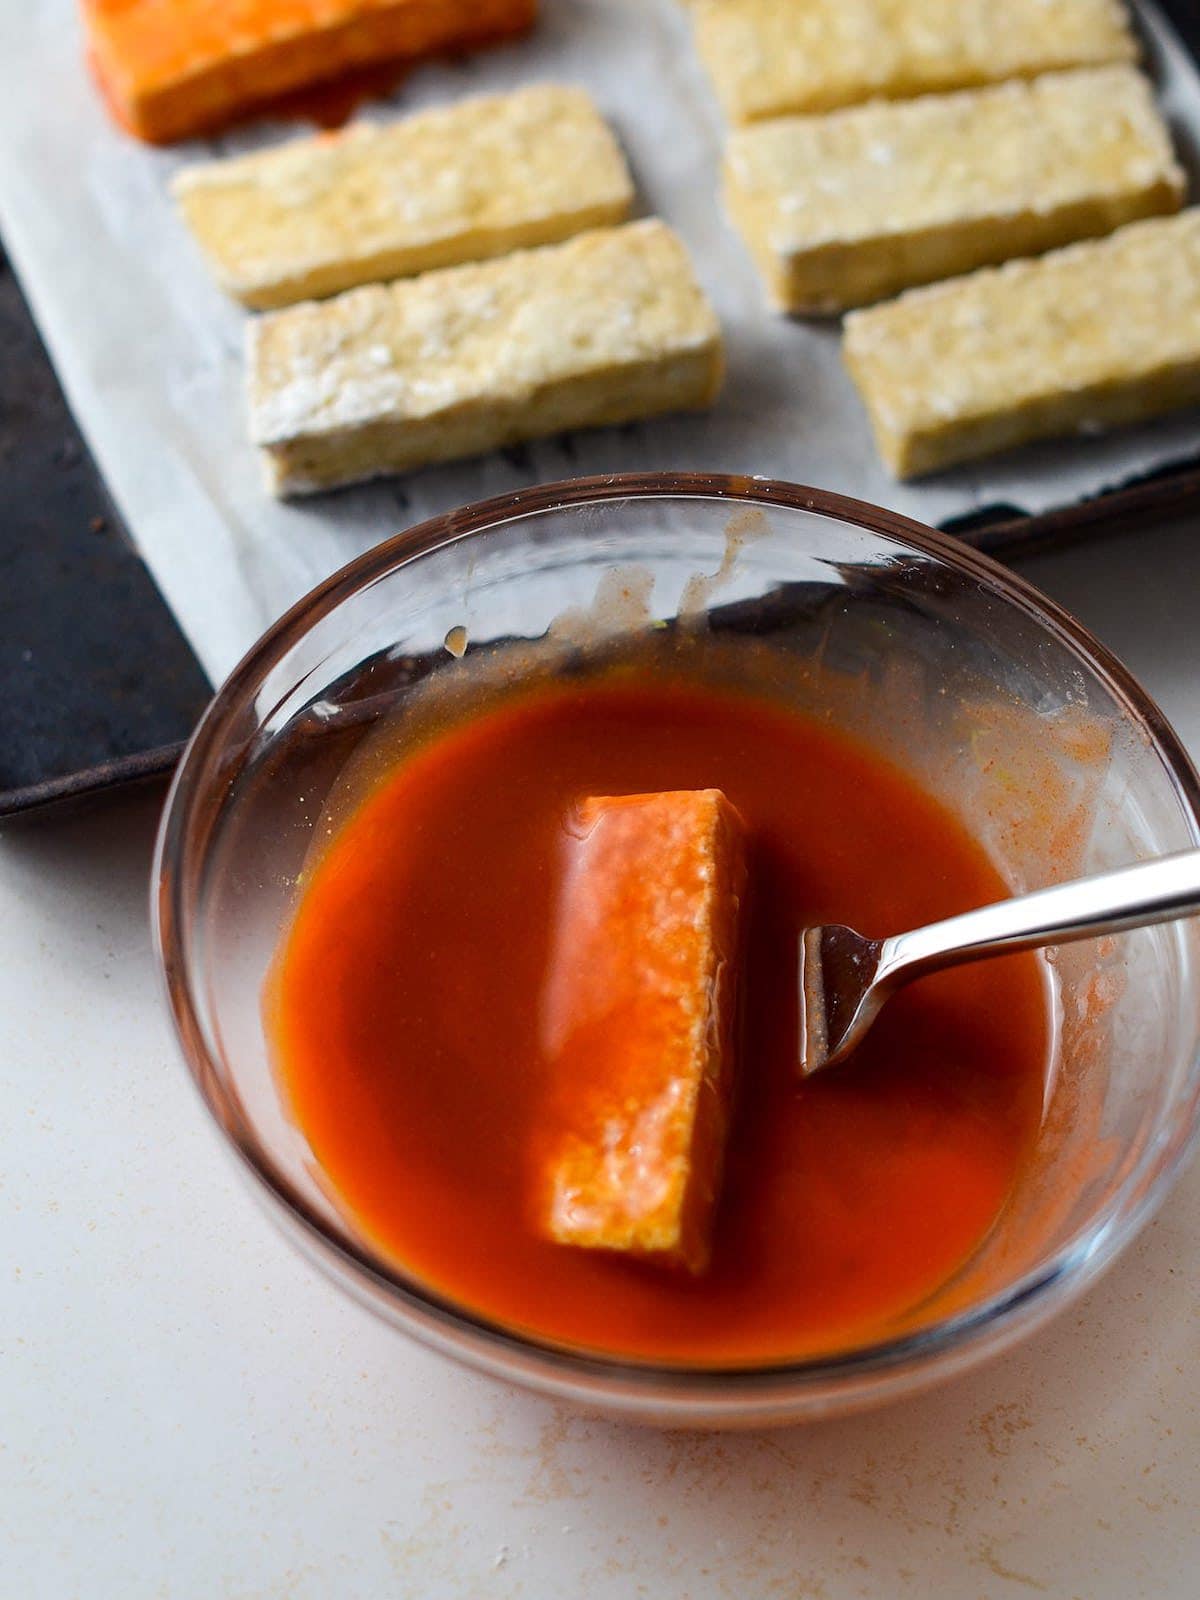 This is a photo of tofu in buffalo sauce.